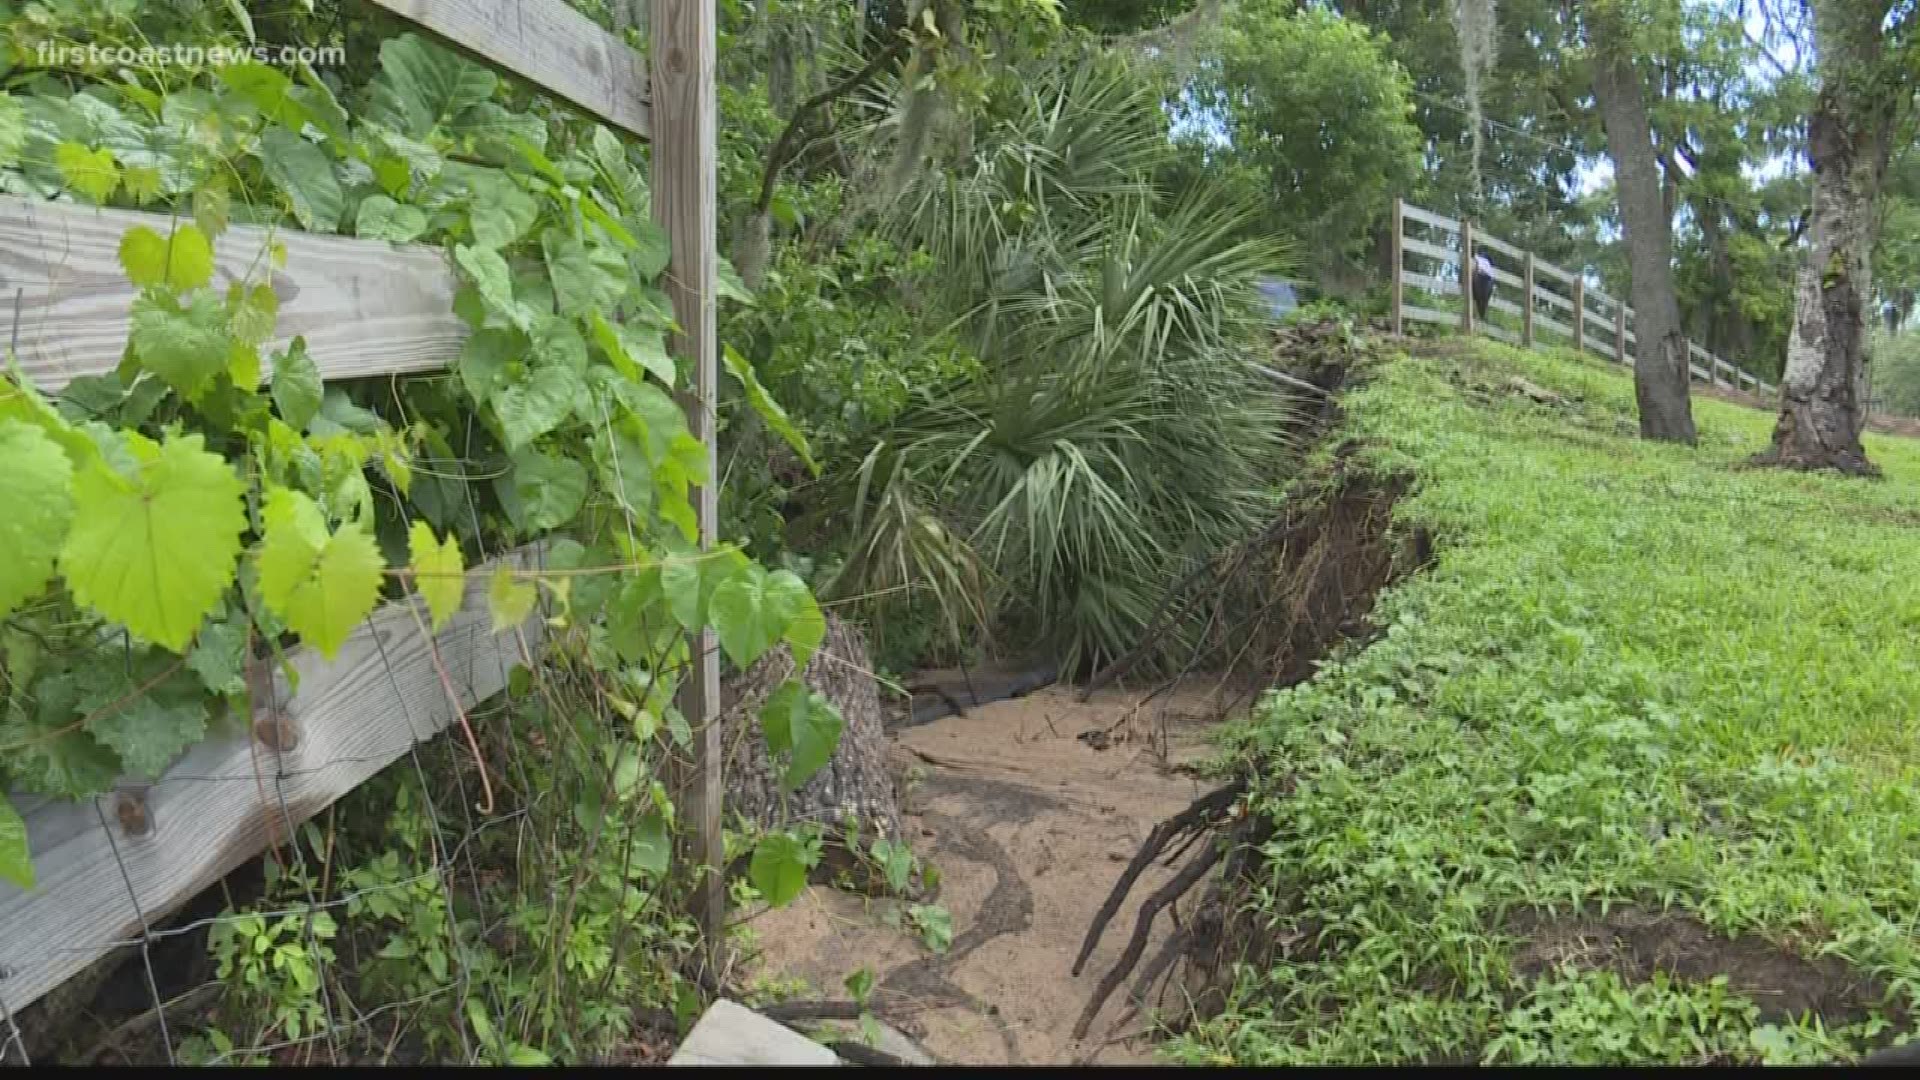 The Florida Department of Environmental Protection responds to Arlington resident's concern about a gaping hole in his backyard. They said they have three options.